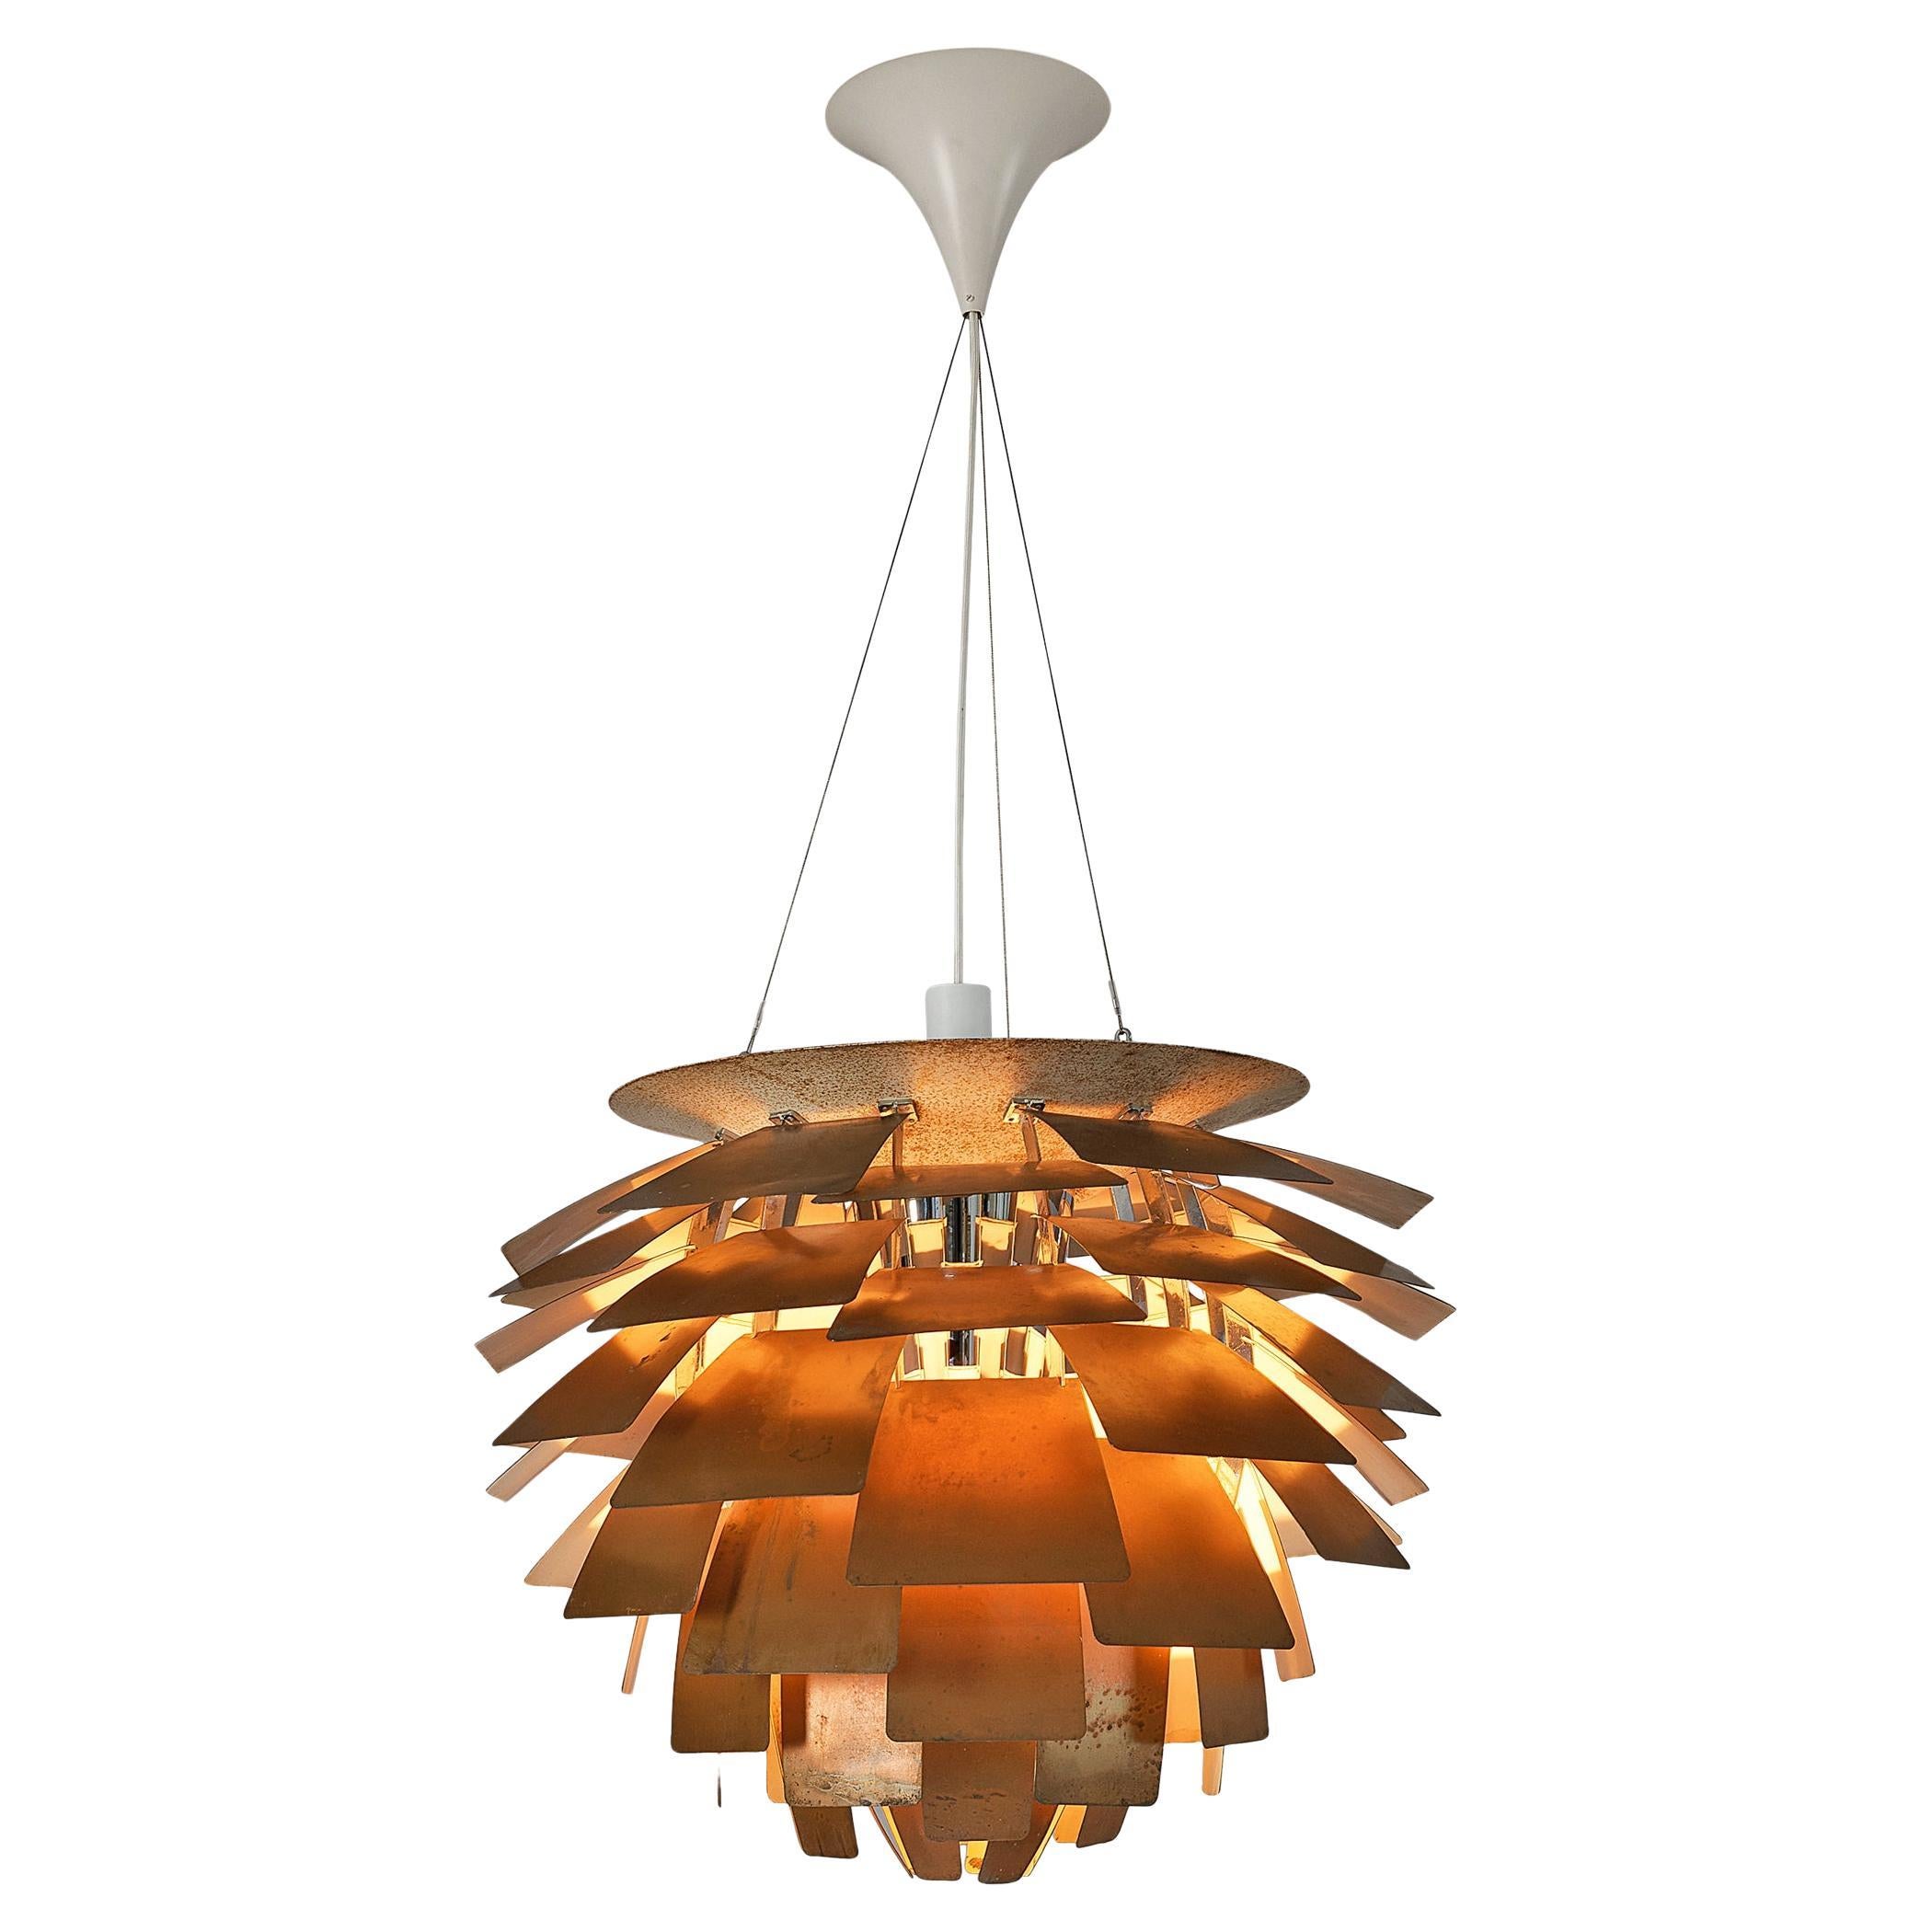 First Edition Poul Henningsen 'Artichoke' Chandelier with Copper Shades For Sale